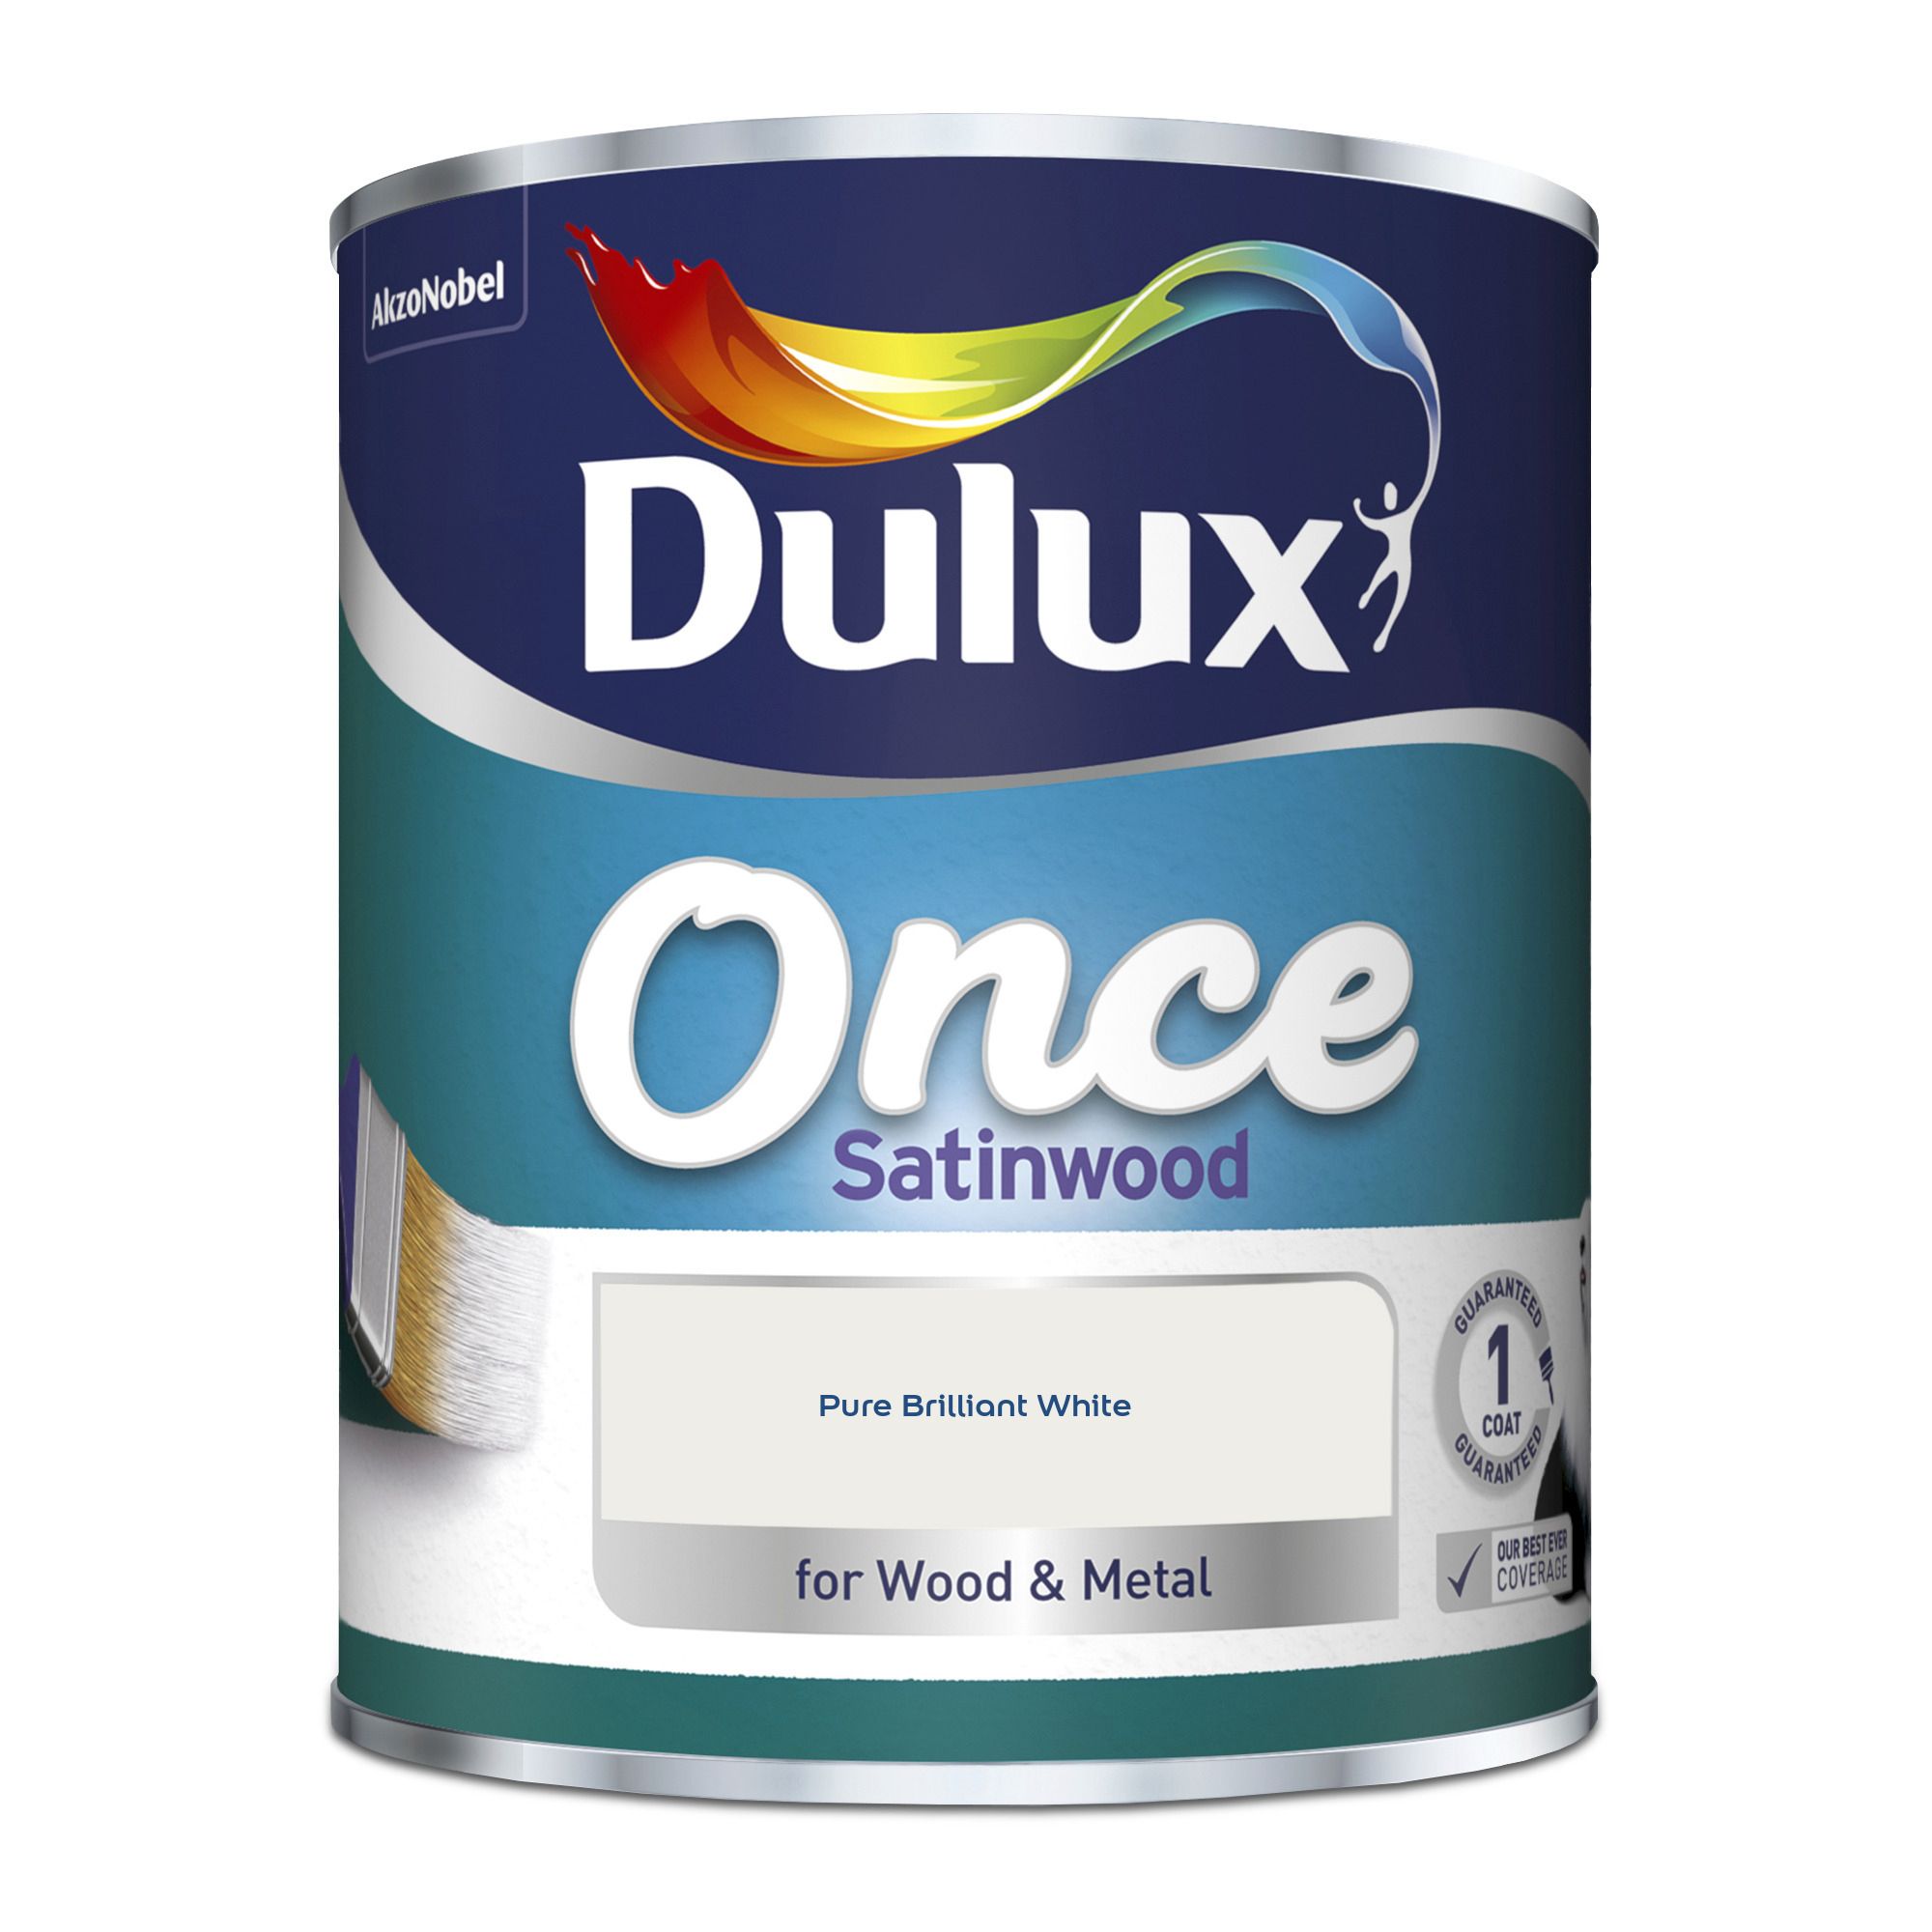 Dulux Once Pure brilliant white Satinwood Metal & wood paint, 750ml